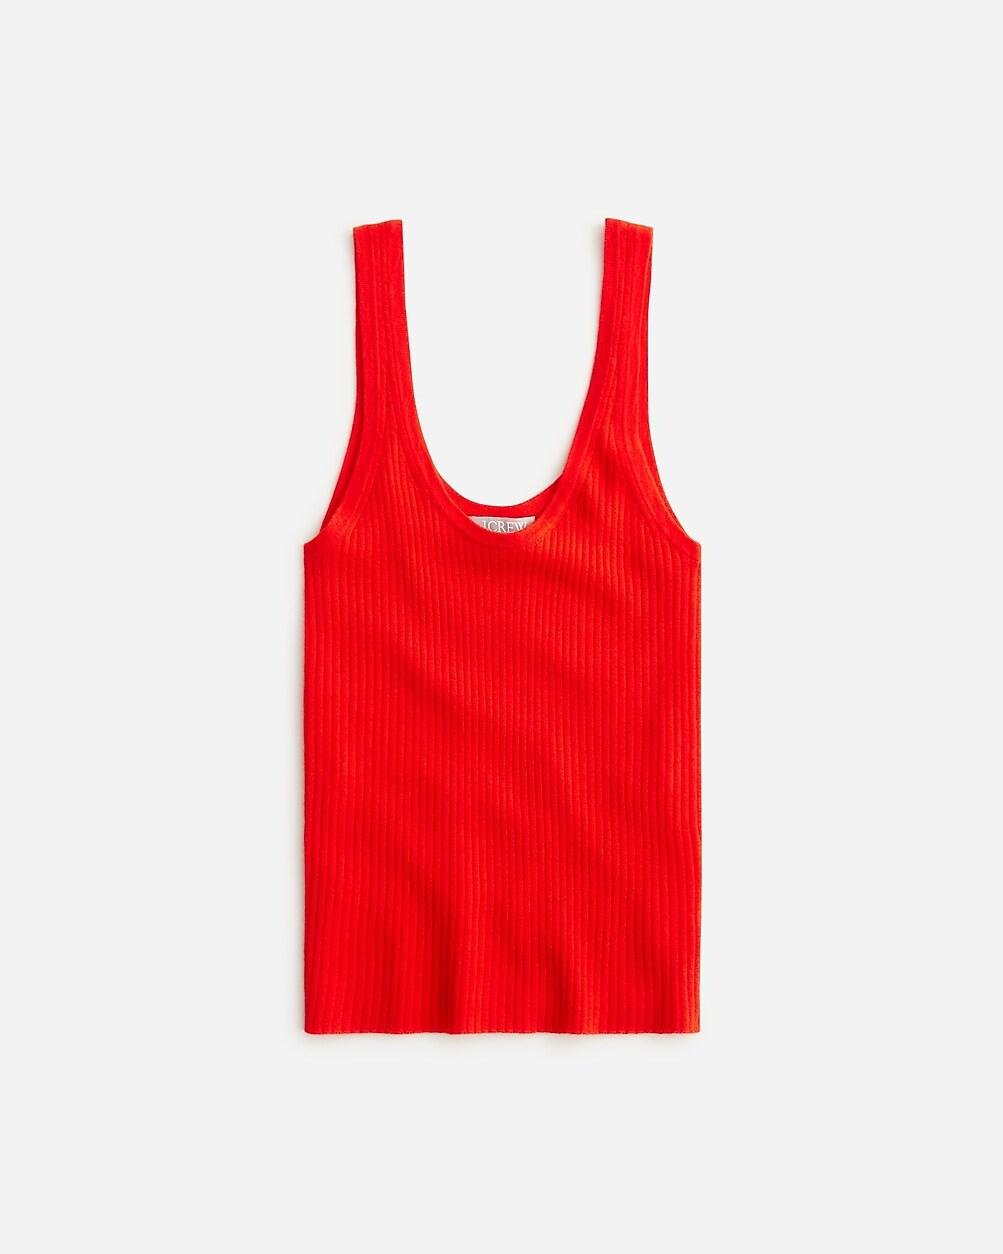 Featherweight cashmere ribbed tank top by J.CREW